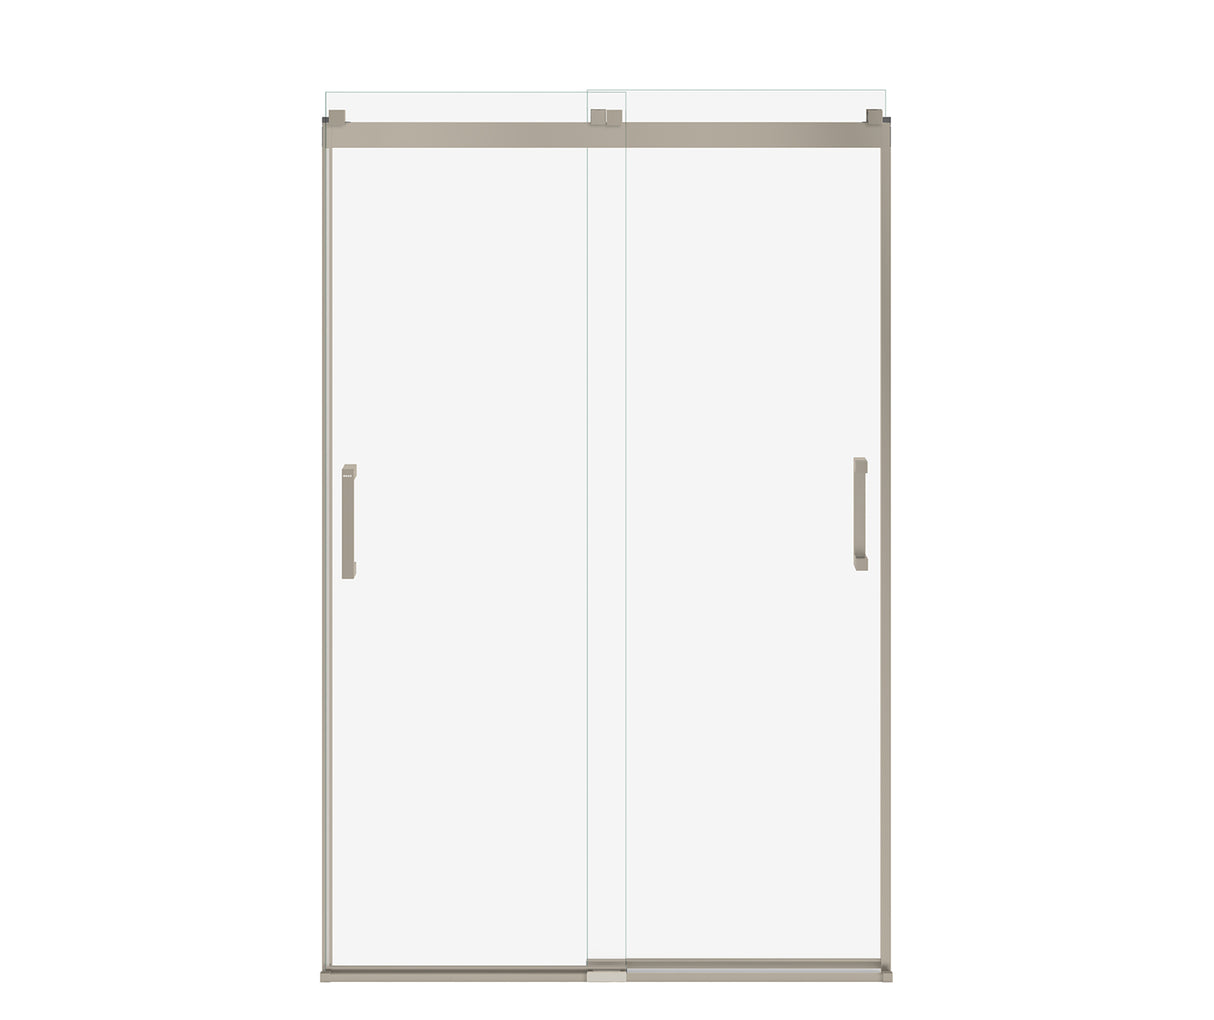 MAAX 135693-900-305-000 Revelation Square 44-47 x 70 ½-73 in. 8mm Bypass Shower Door for Alcove Installation with Clear glass in Brushed Nickel